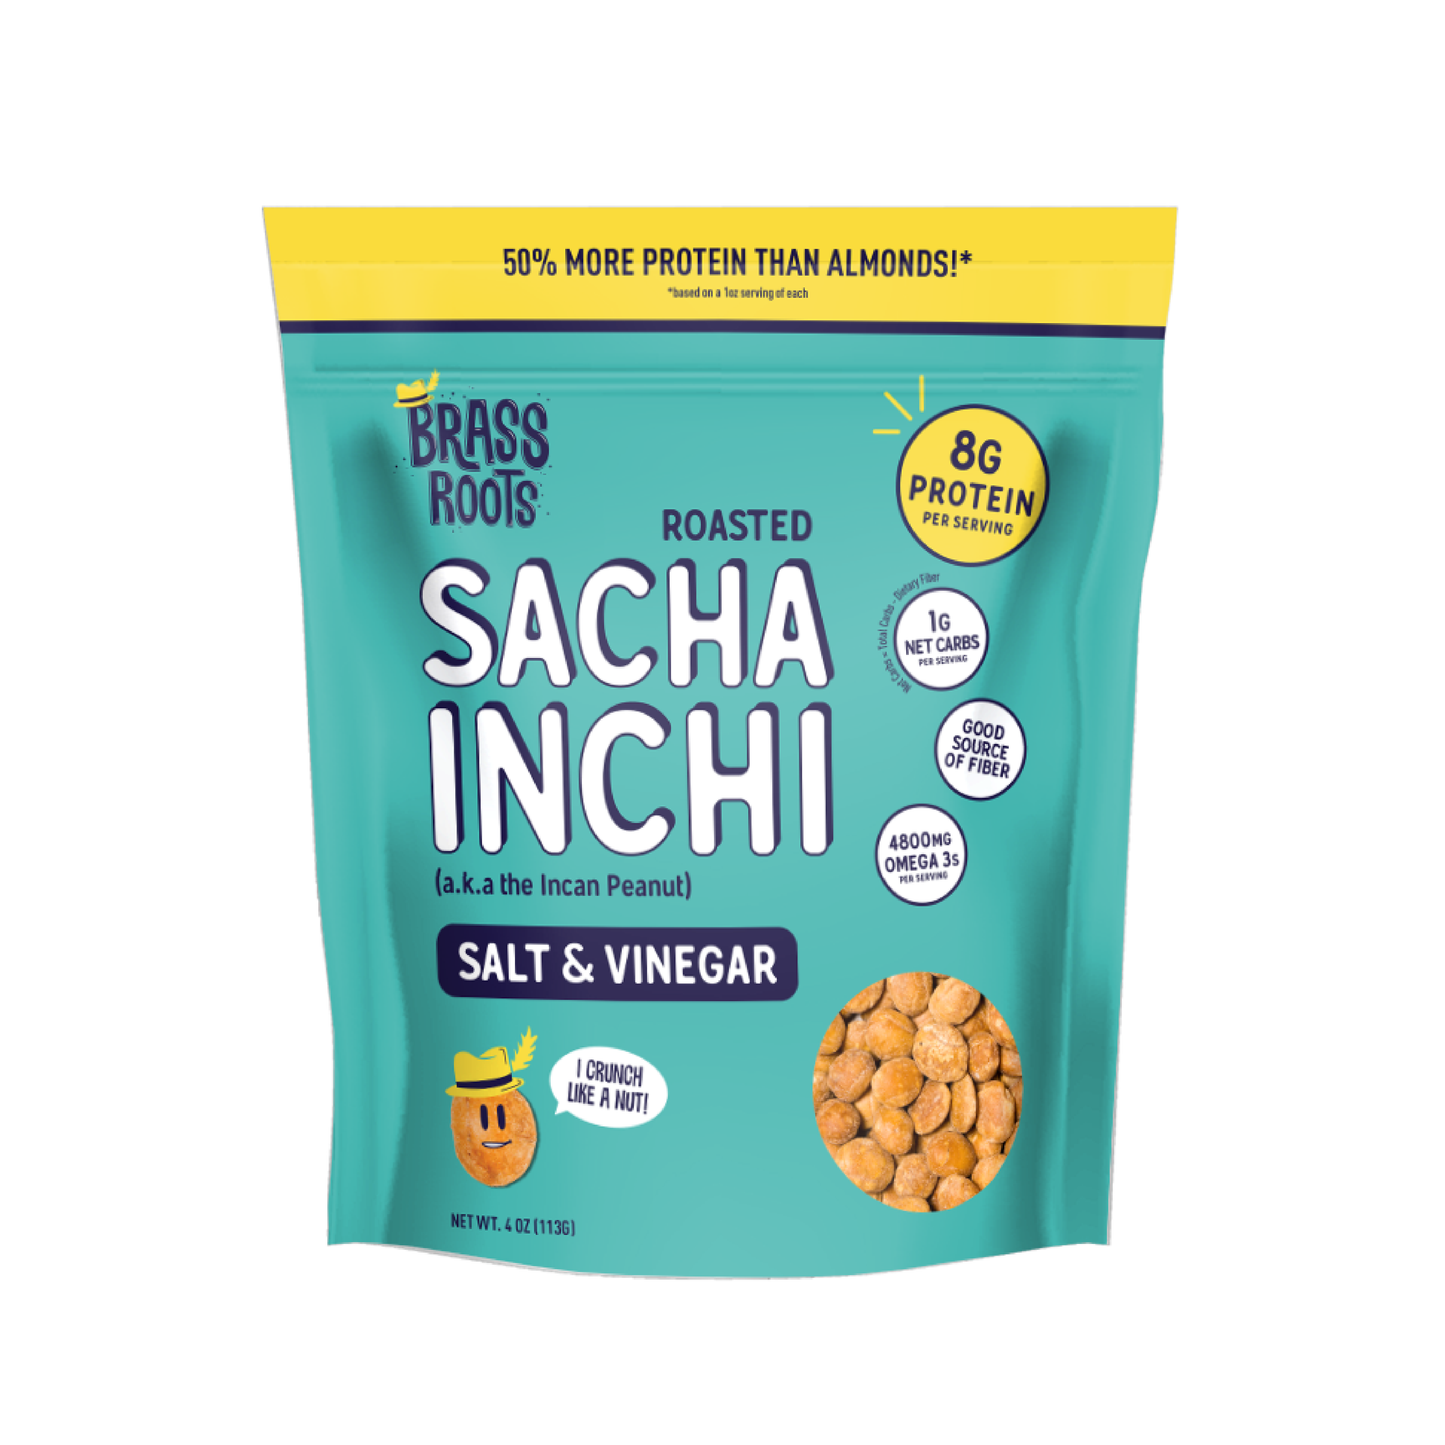 CLOSEOUT SALE ON LIMITED TIME SKUS - Roasted Sacha Inchi - 4 oz Bags